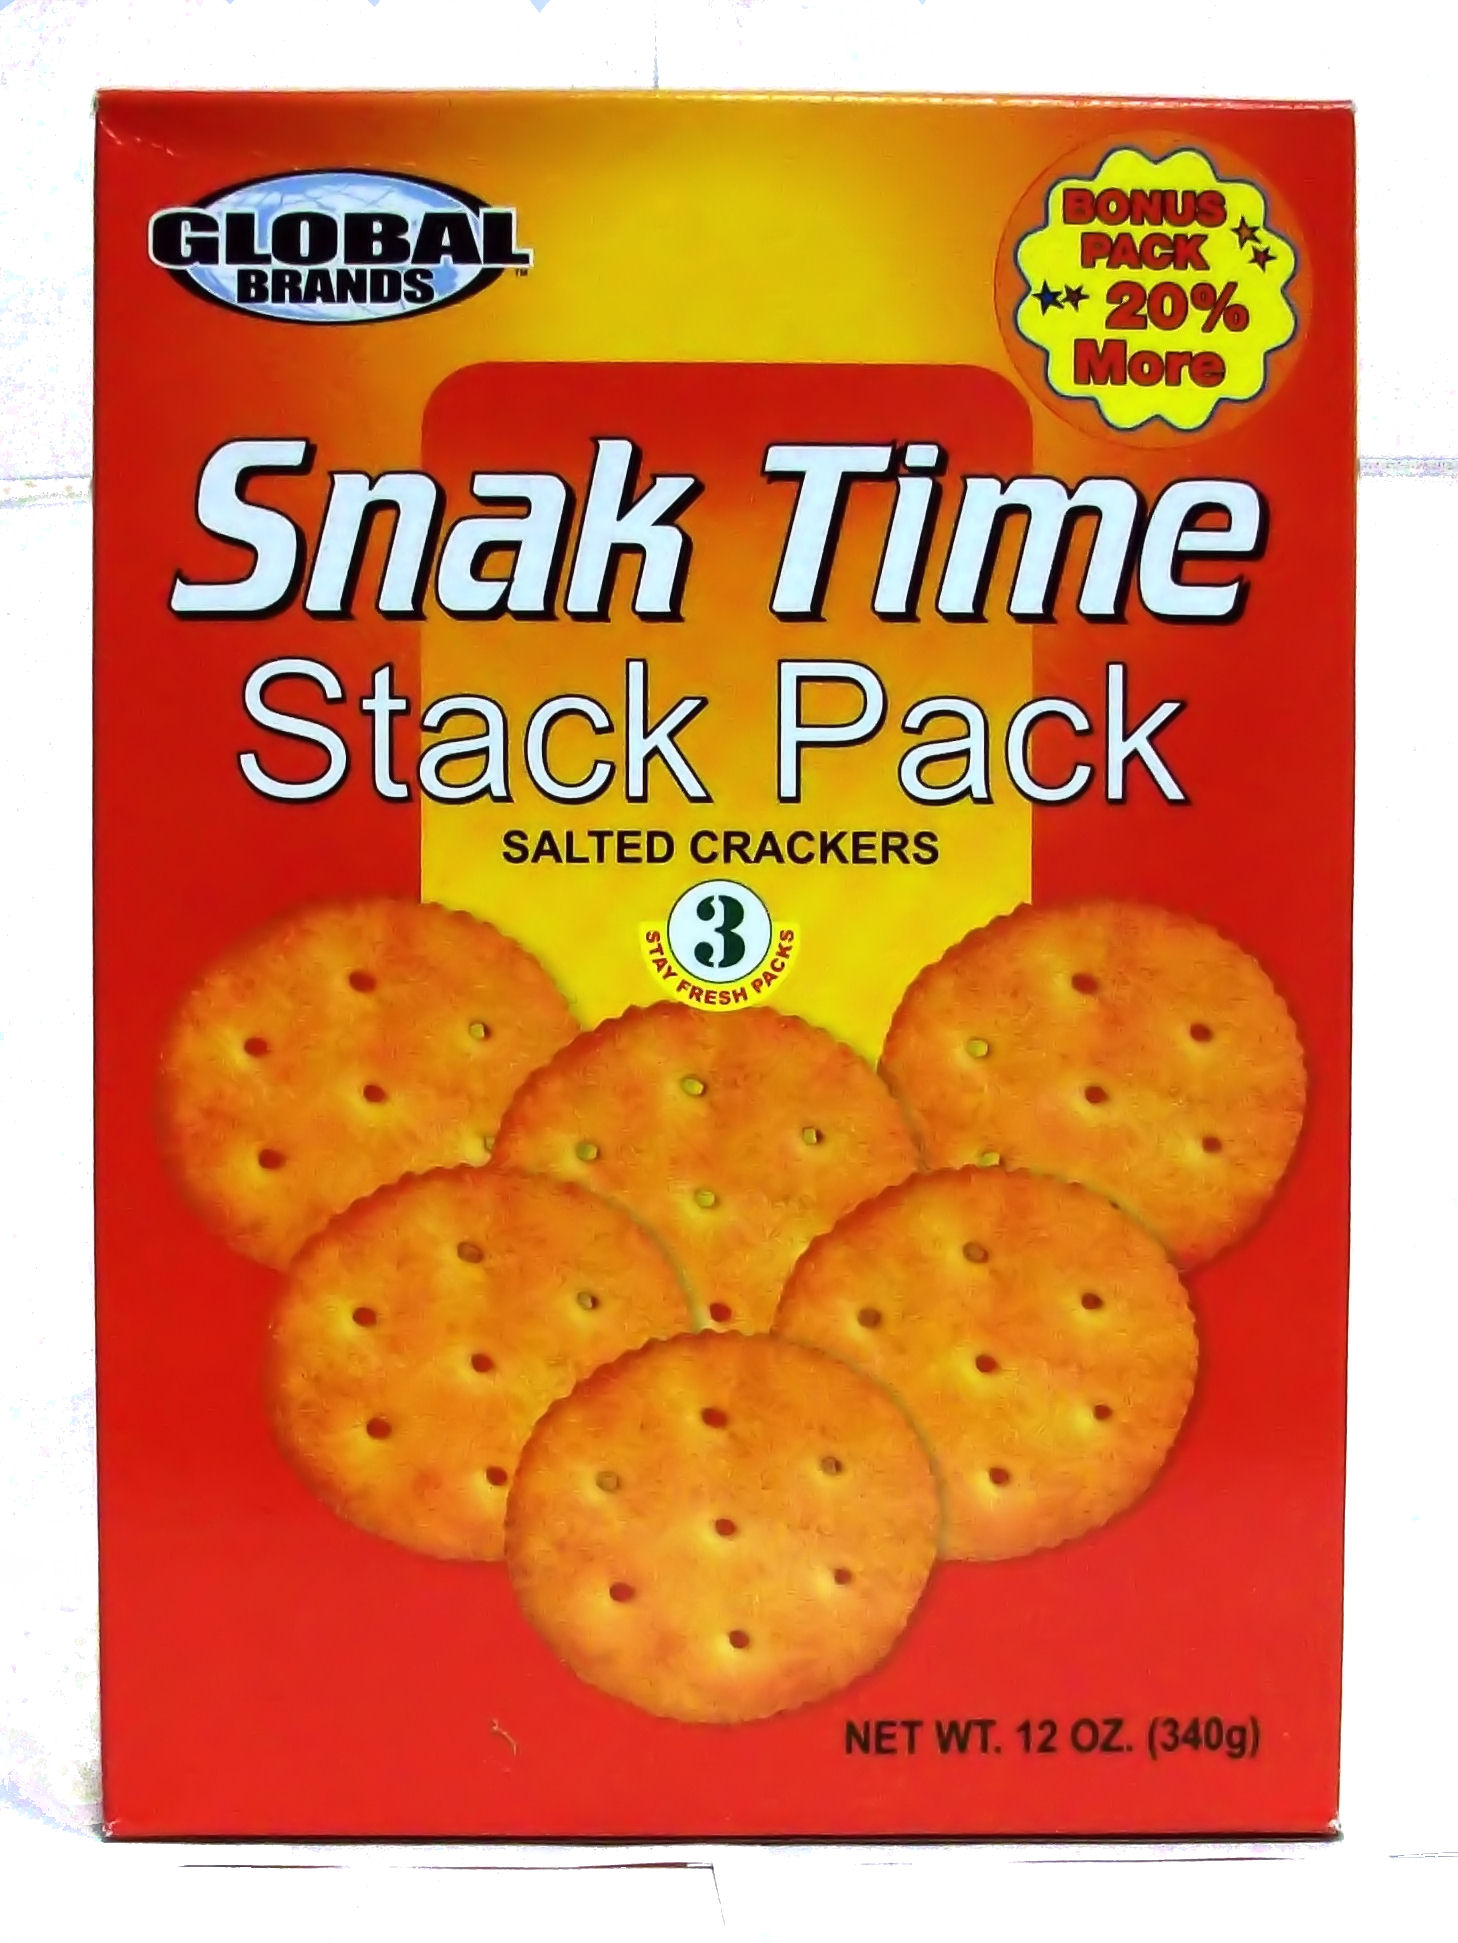 Snak Time Stack Pack™ Crackers